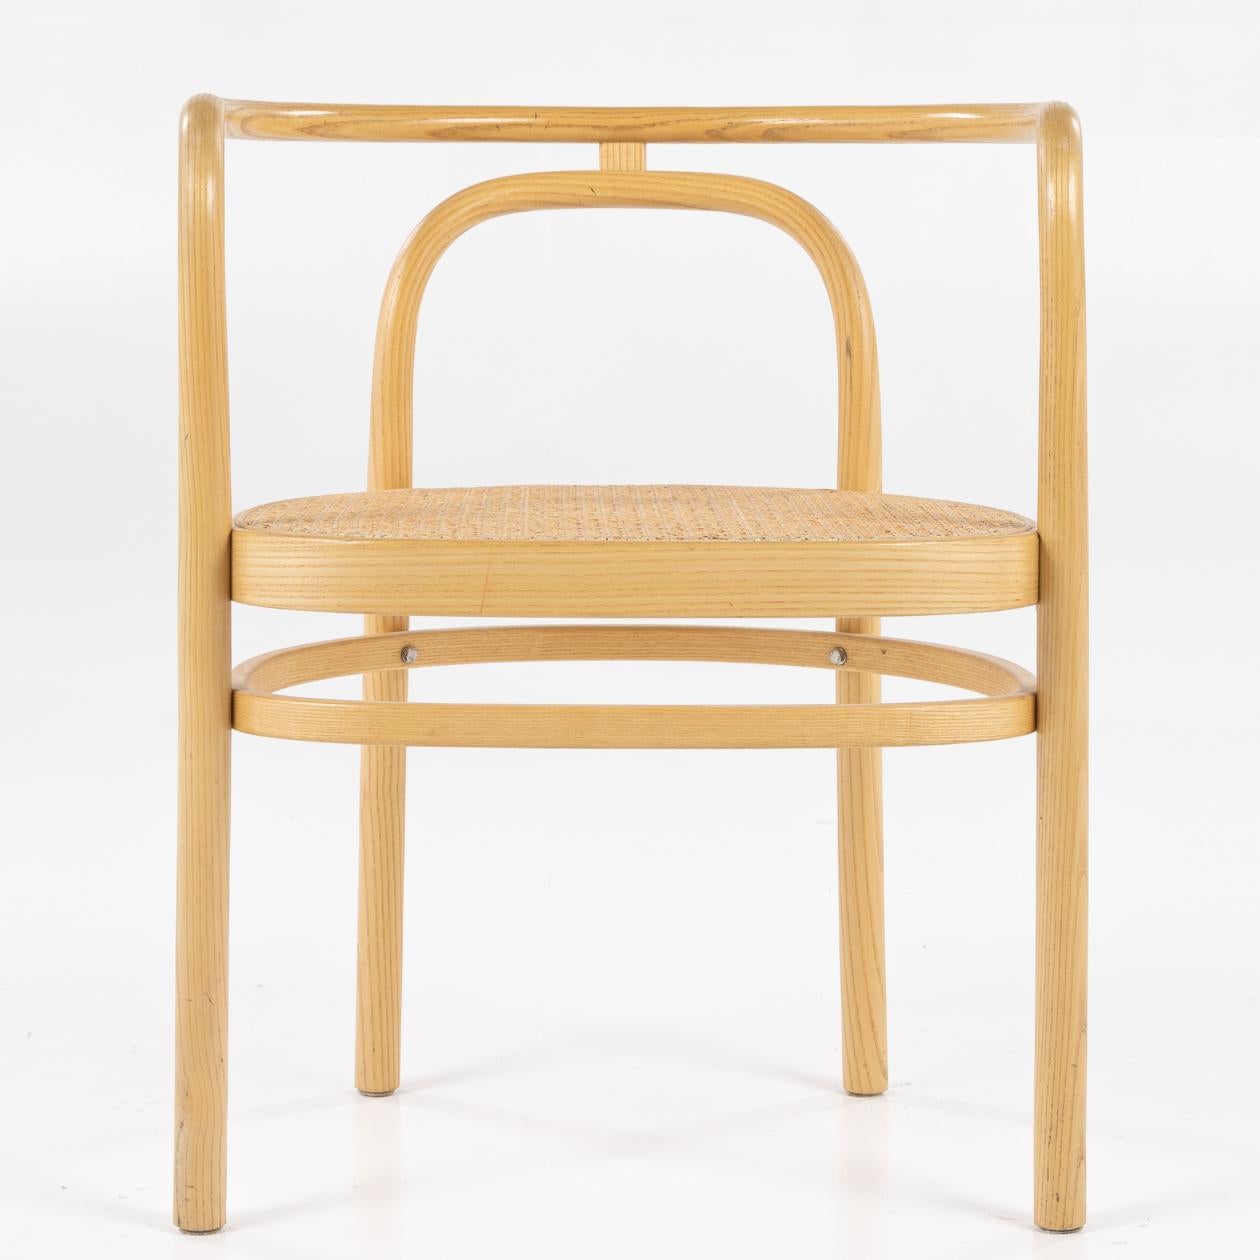 Cane Set of 6 chairs by Poul Kjærholm 